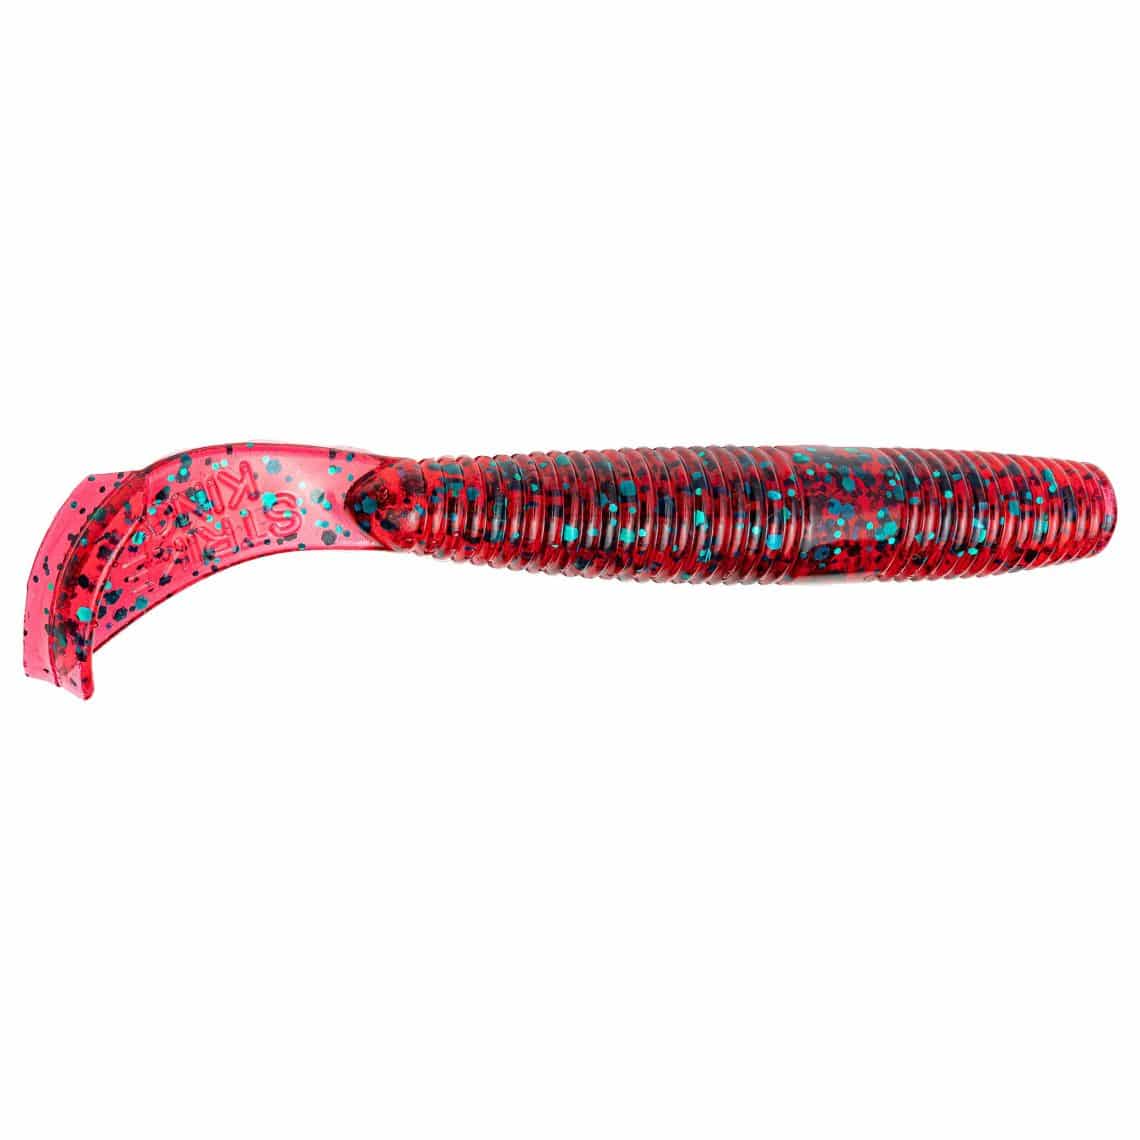 STRIKE KING 3 RAGE NED CUT R WORM 9PK - Northwoods Wholesale Outlet